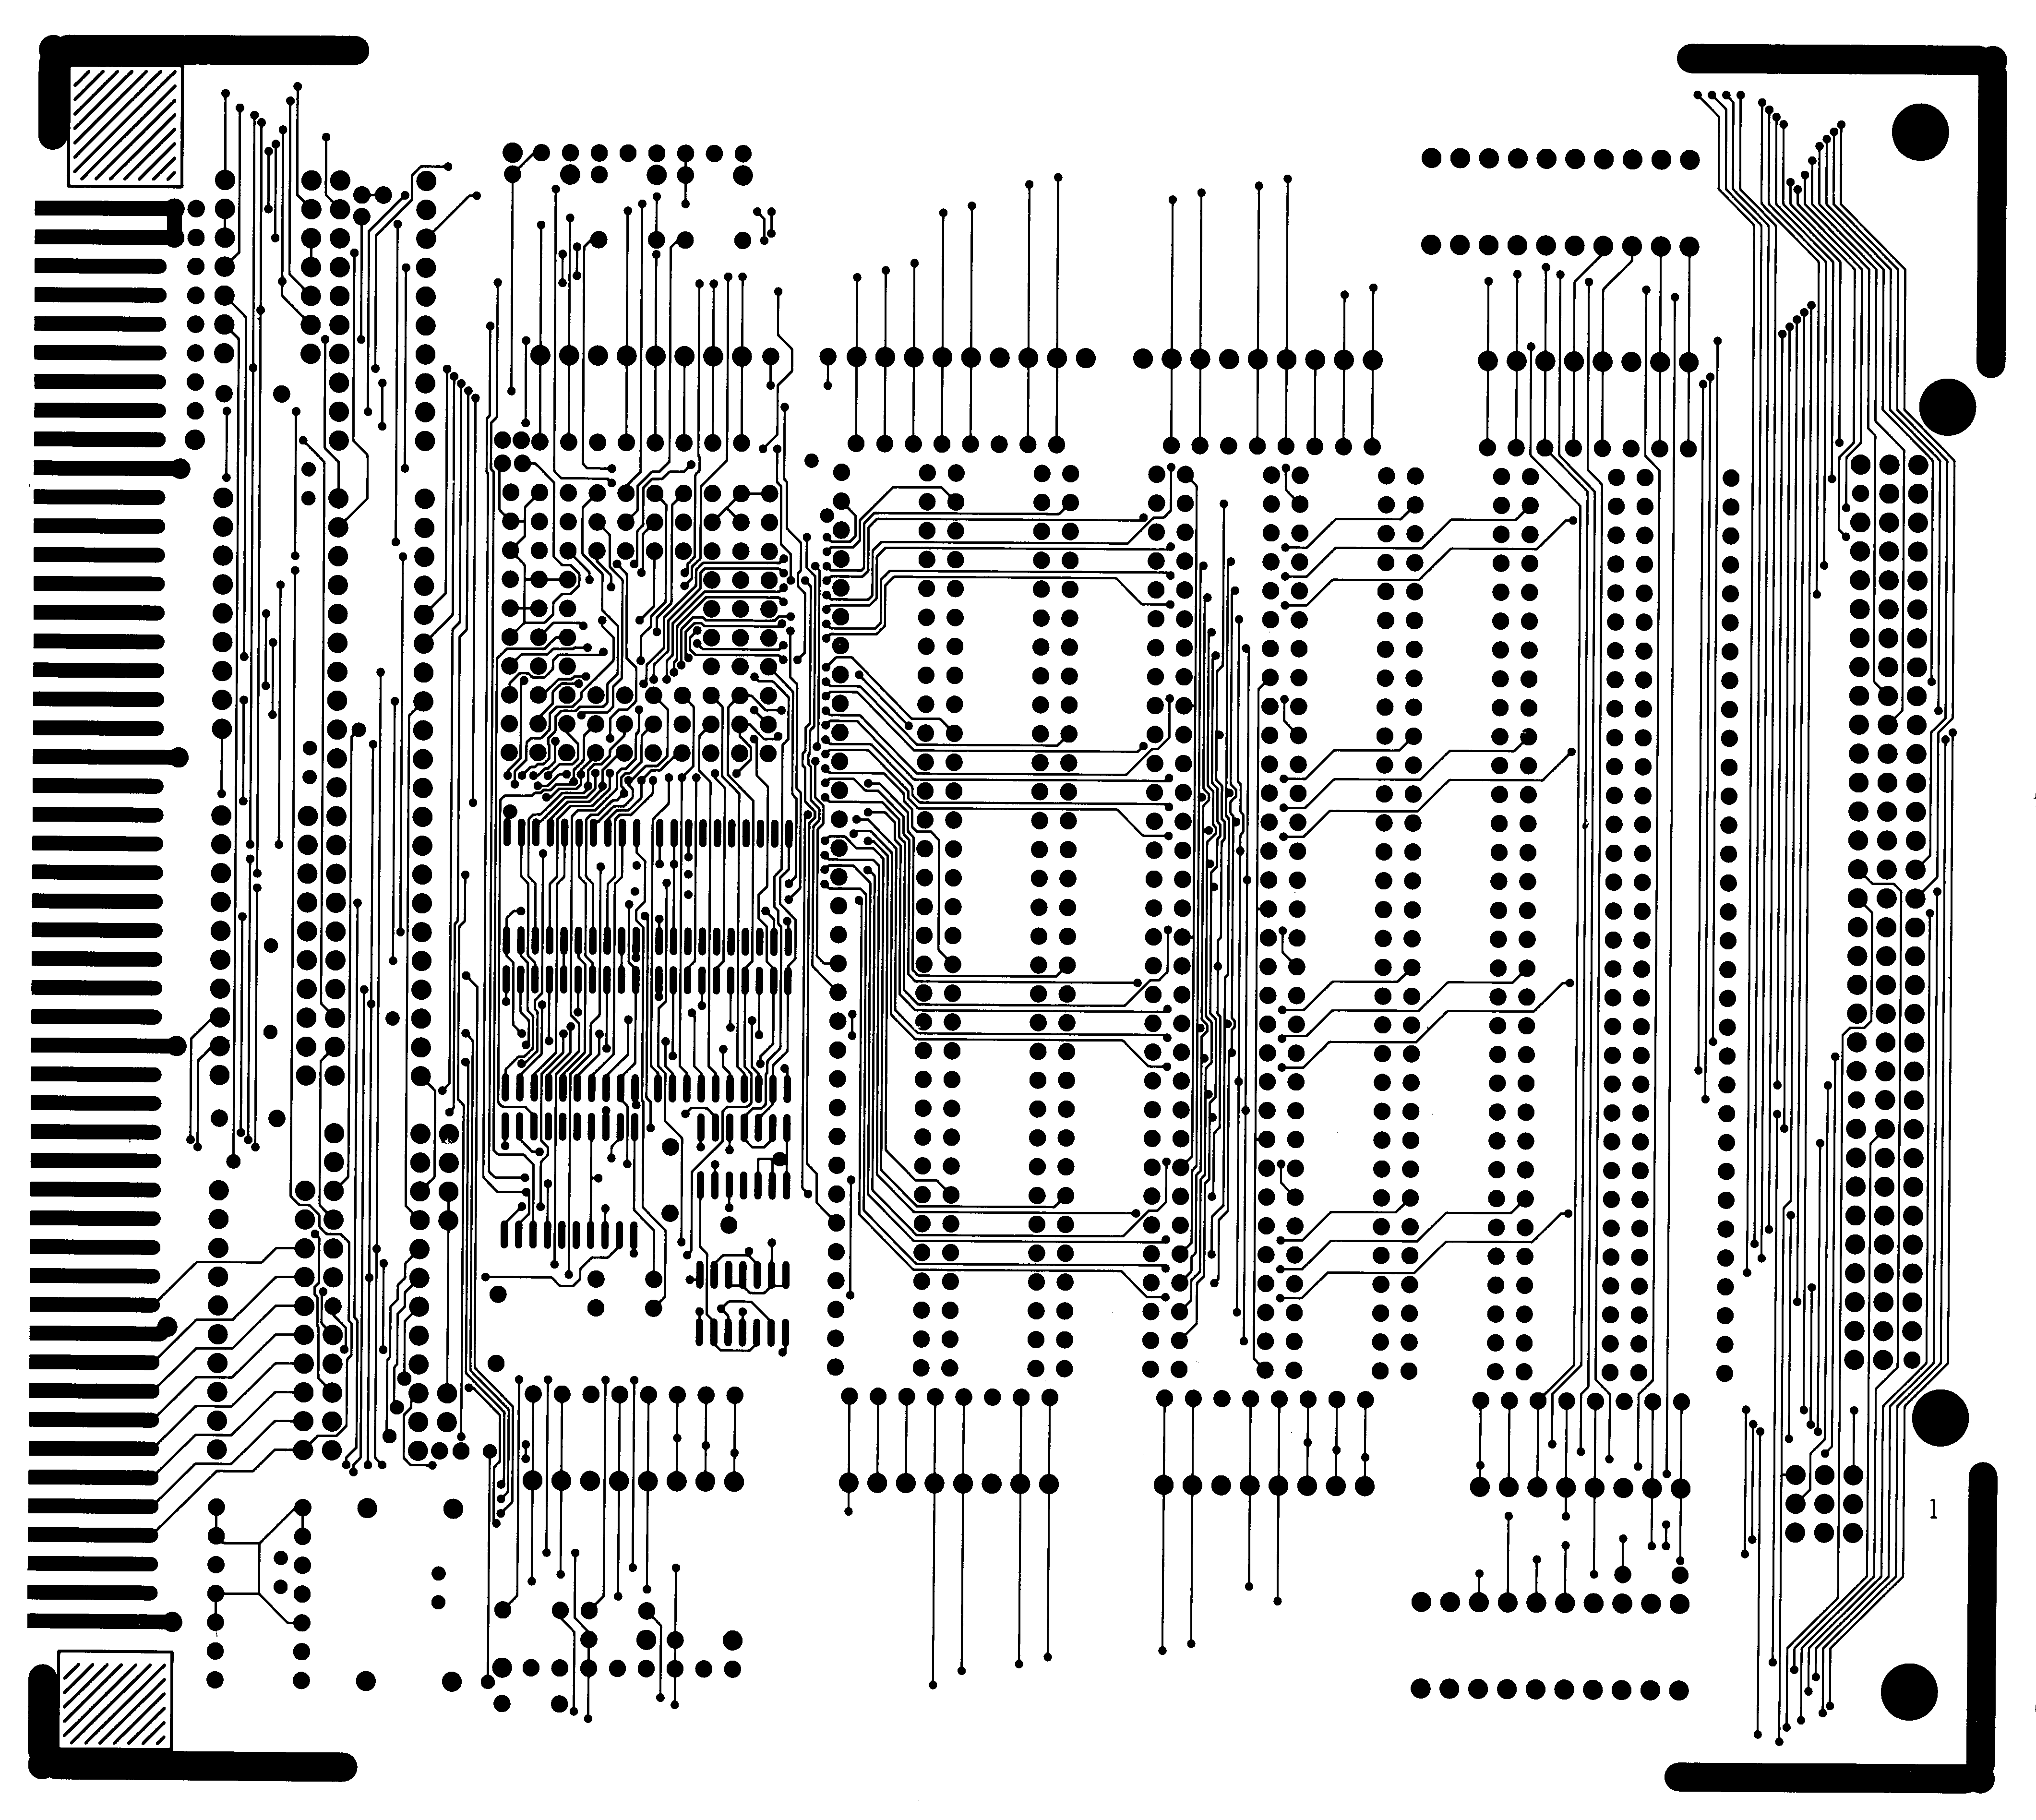 PCB layer 1 - component side